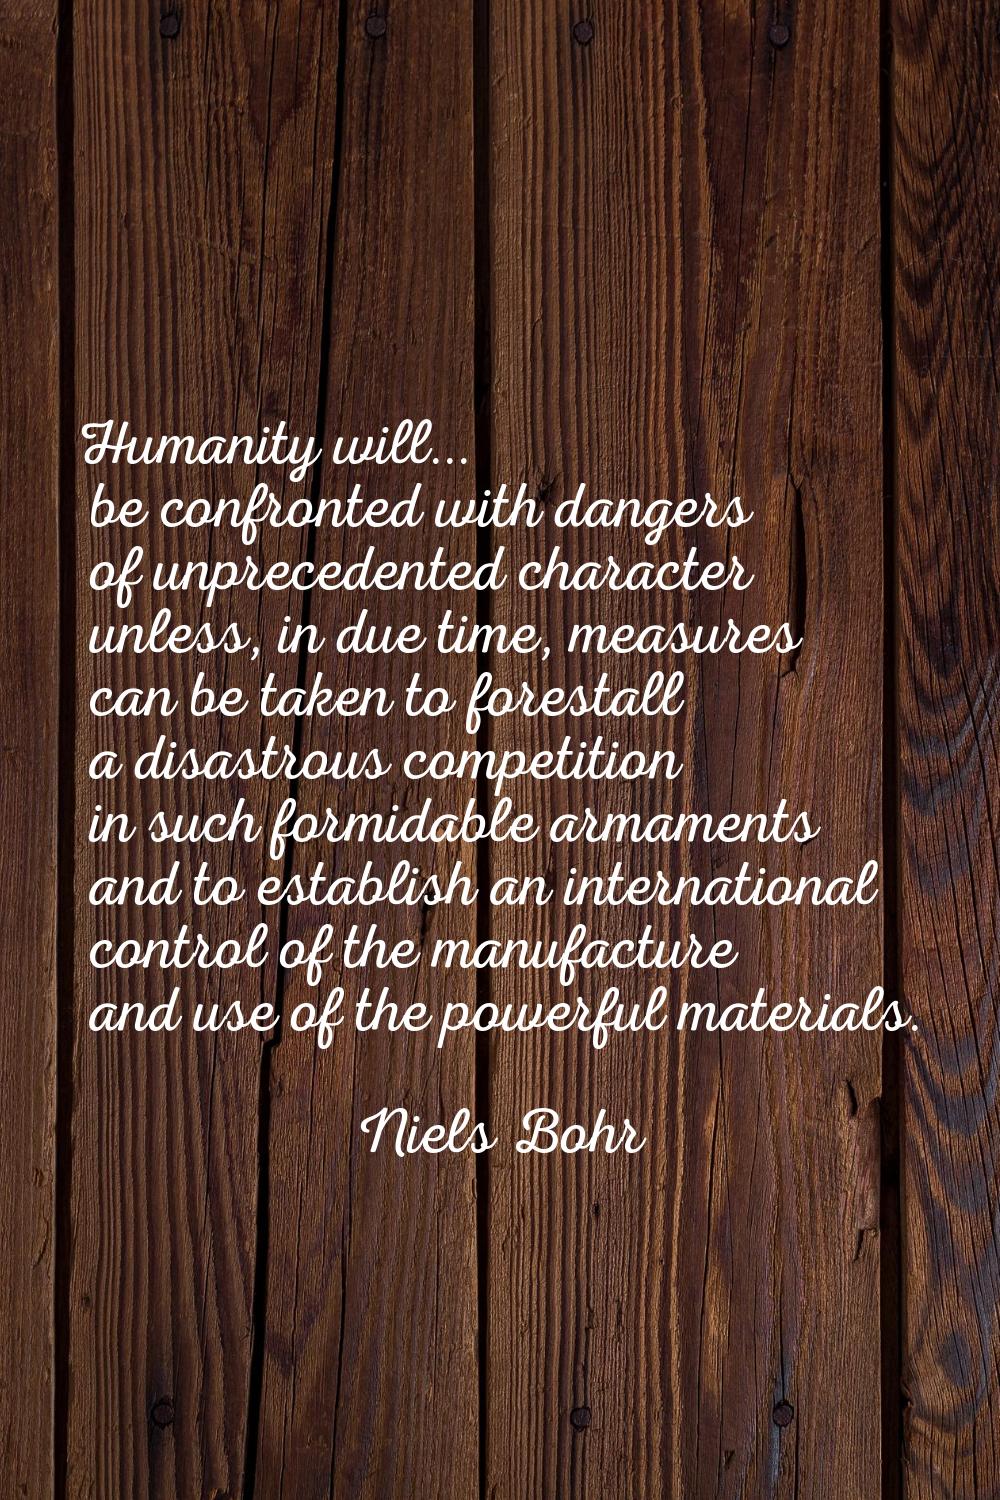 Humanity will... be confronted with dangers of unprecedented character unless, in due time, measure